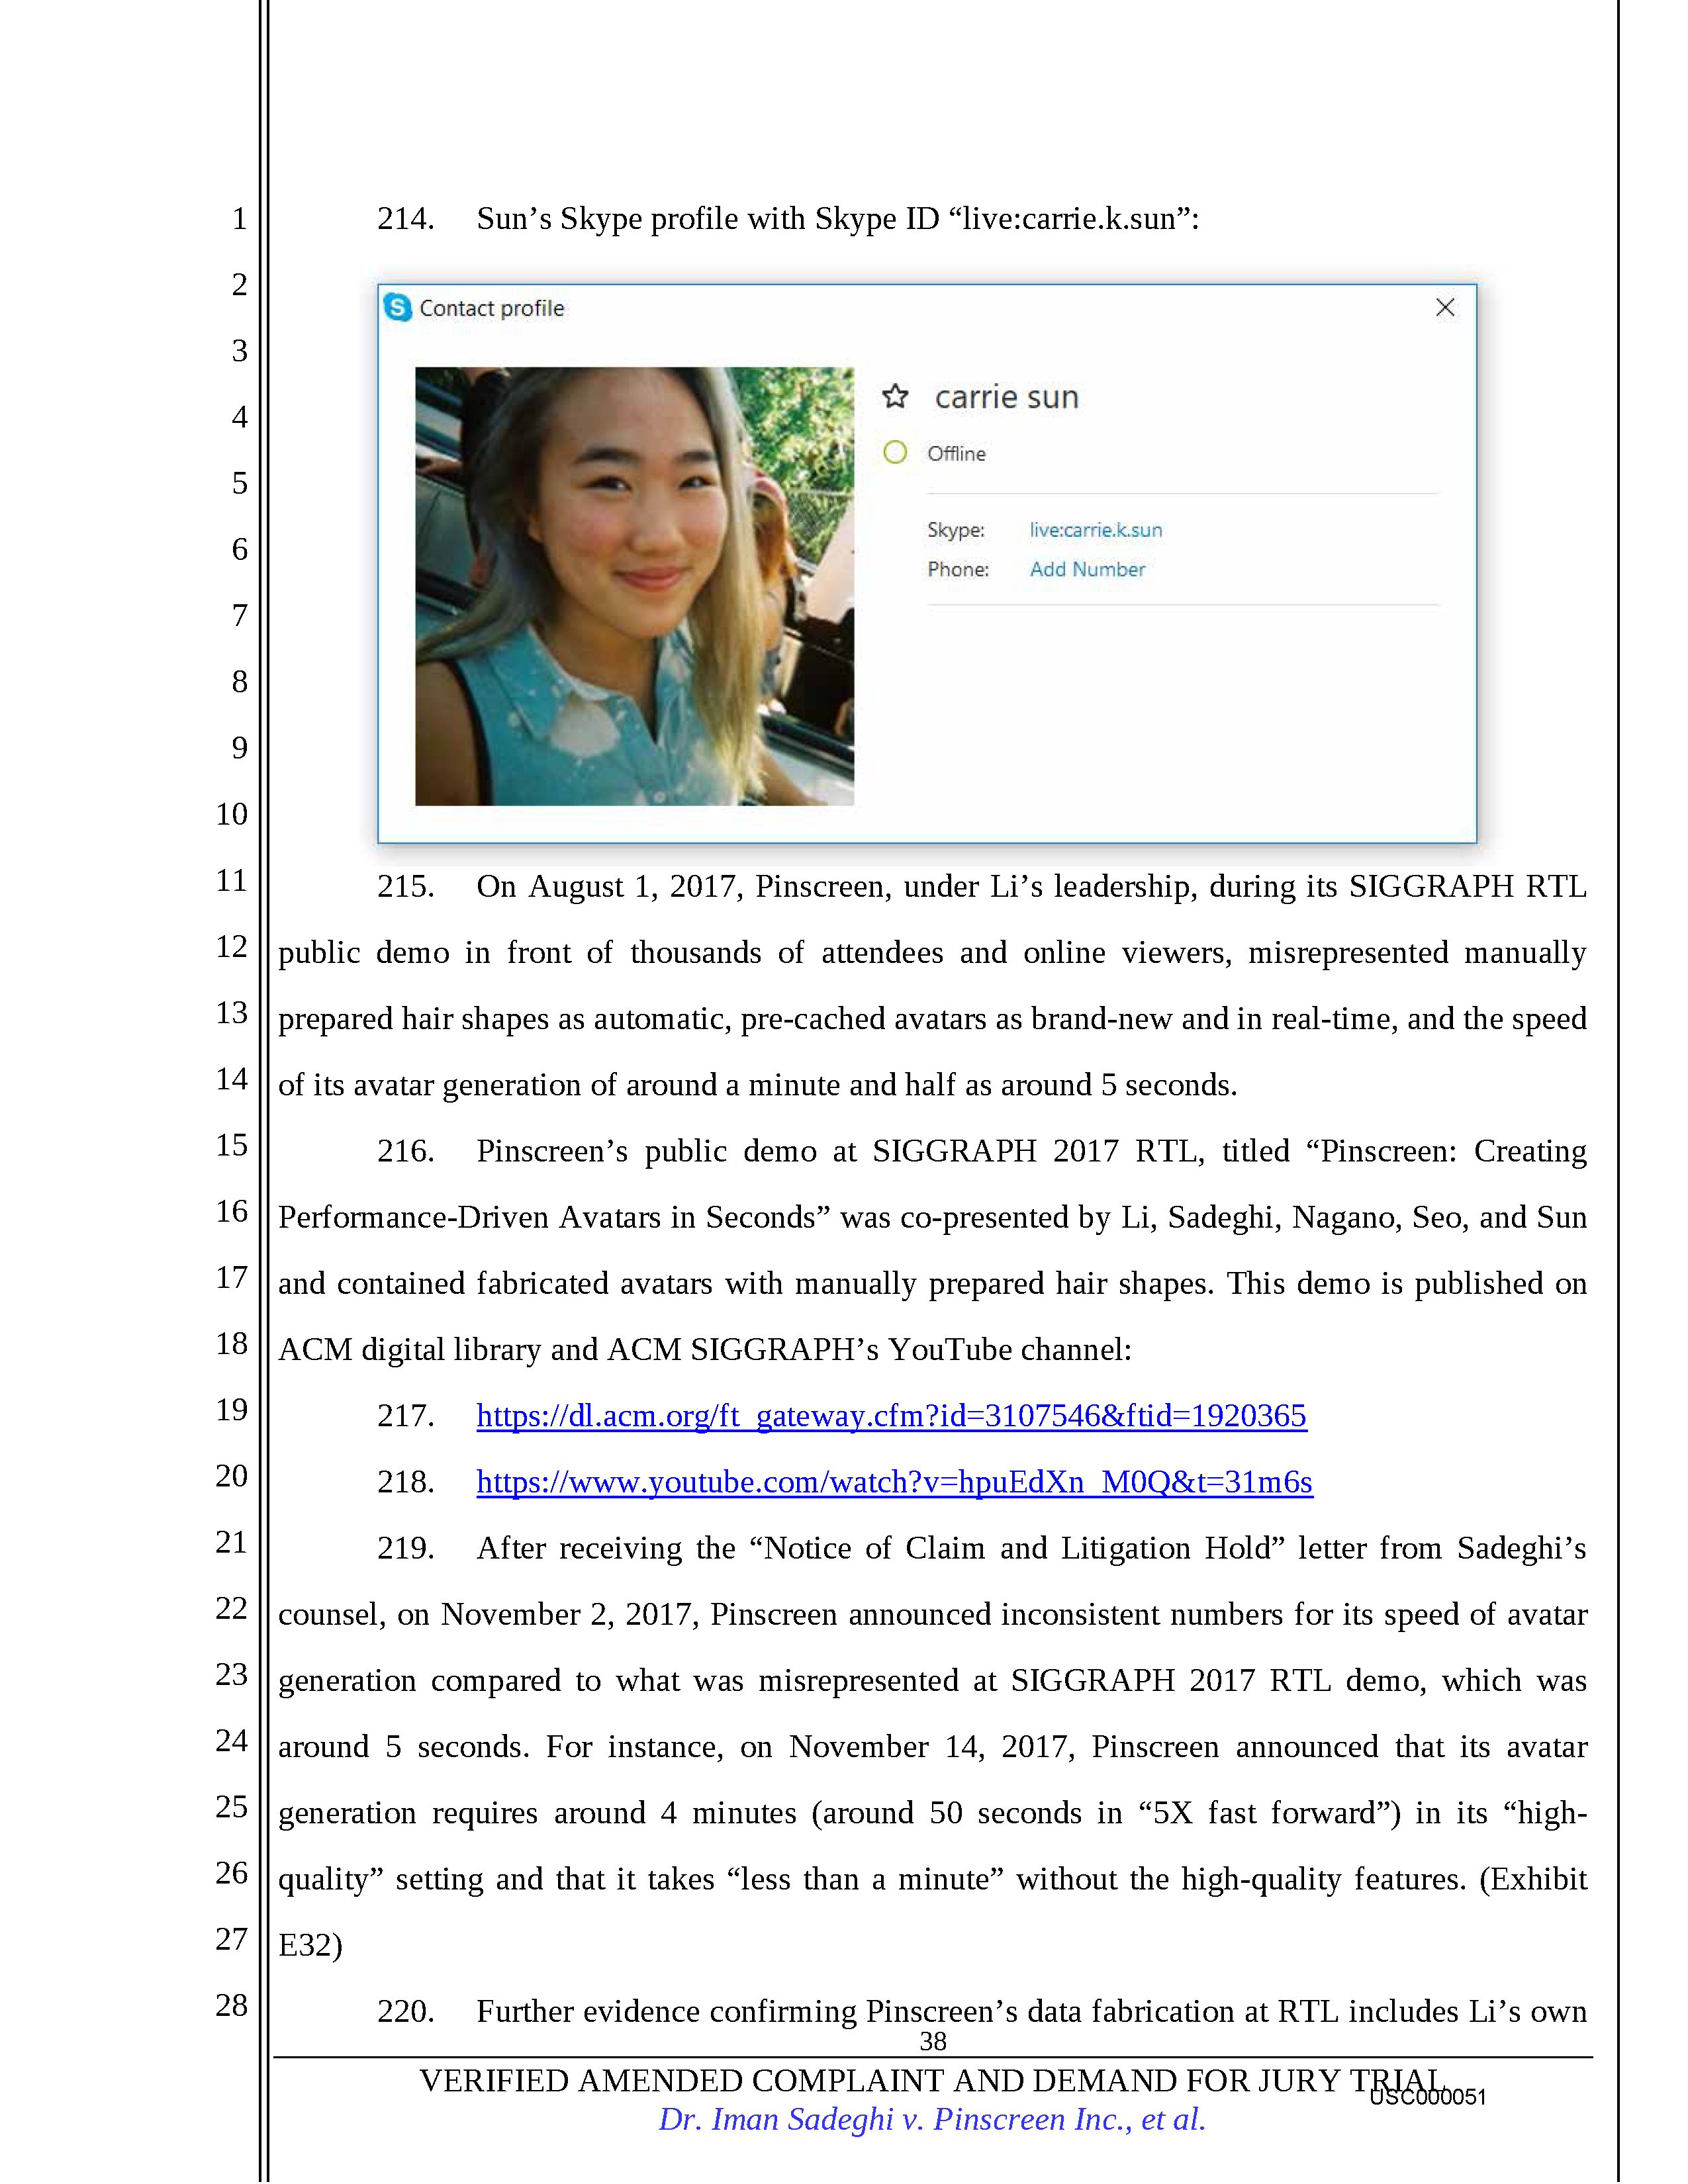 USC's Investigation Report re Hao Li's and Pinscreen's Scientific Misconduct at ACM SIGGRAPH RTL 2017 Page 53